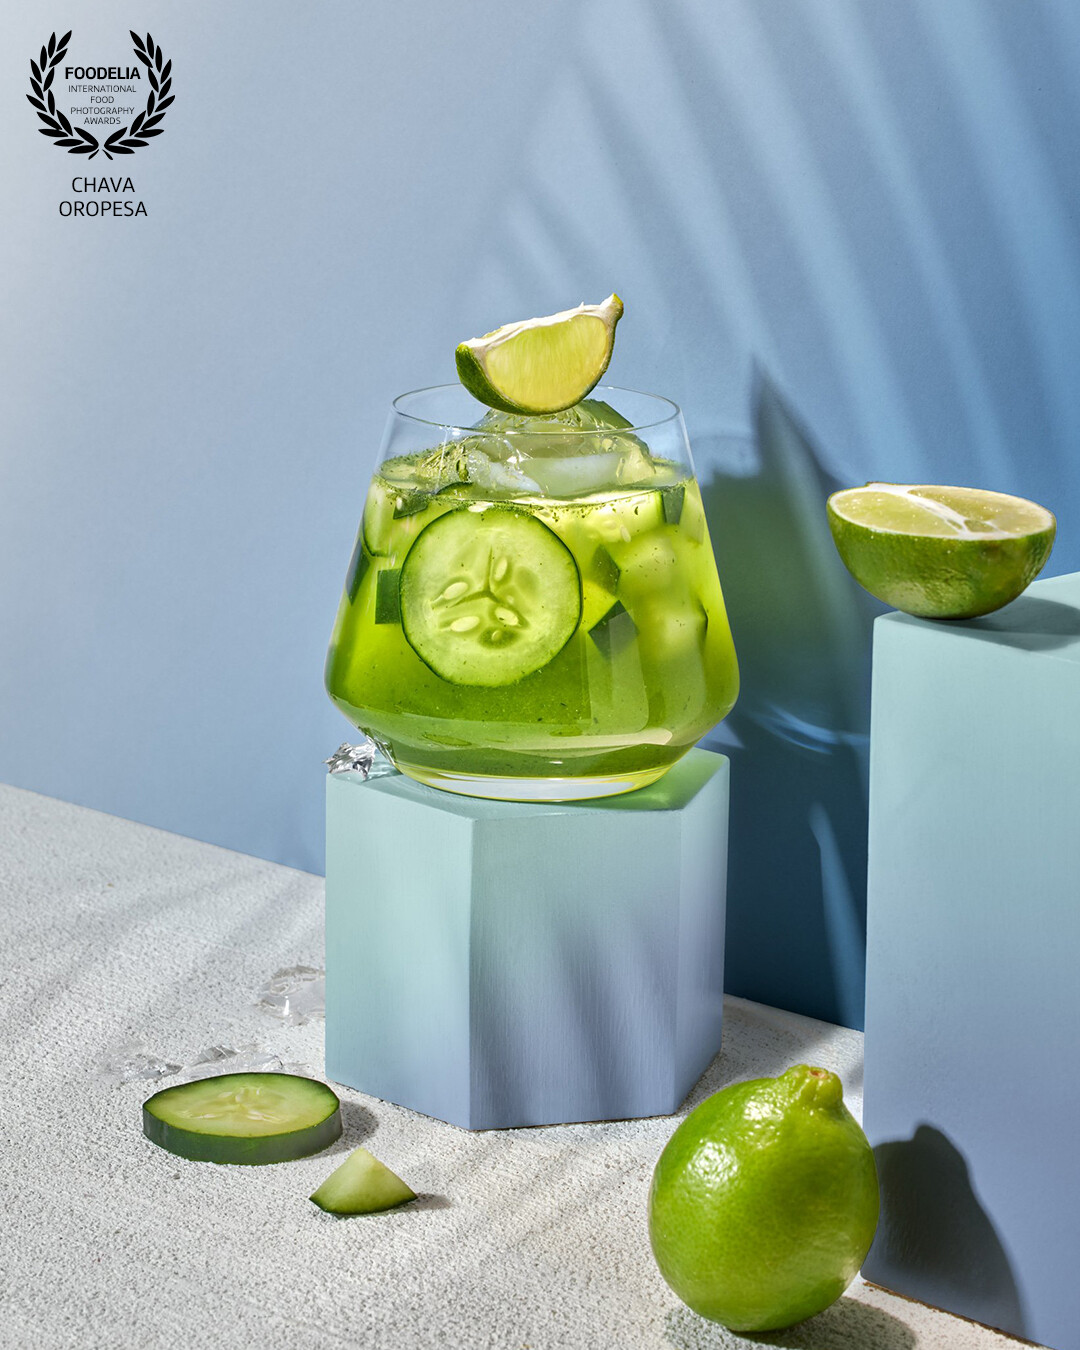 Aguas! 🧊🍉🧊🍋🧊🥭<br />
The perfect pair for any Mexican food, Aguas Frescas are such a huge part of Mexican culture. Pictured is a Cucumber - Lime Agua Fresca<br />
Part of a personal project to give my own spin to these refreshing drinks.